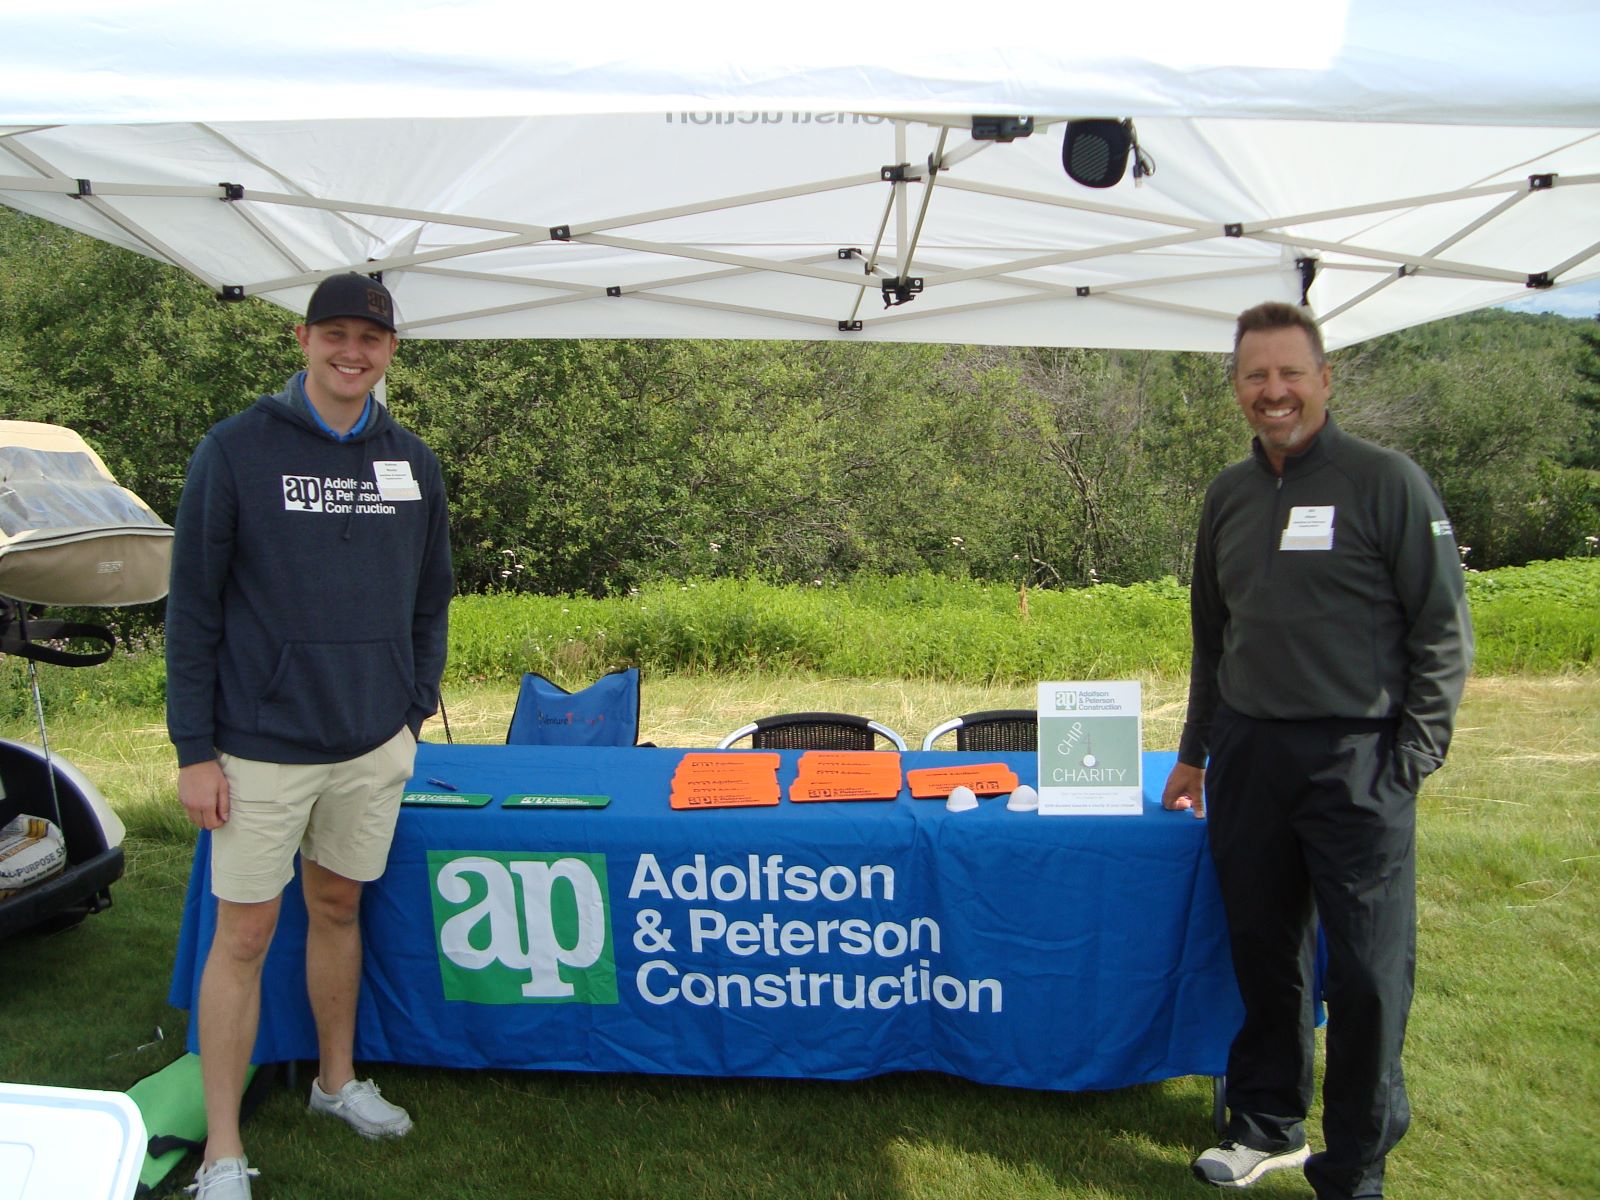 Adolfson and Peterson Construction booth at event